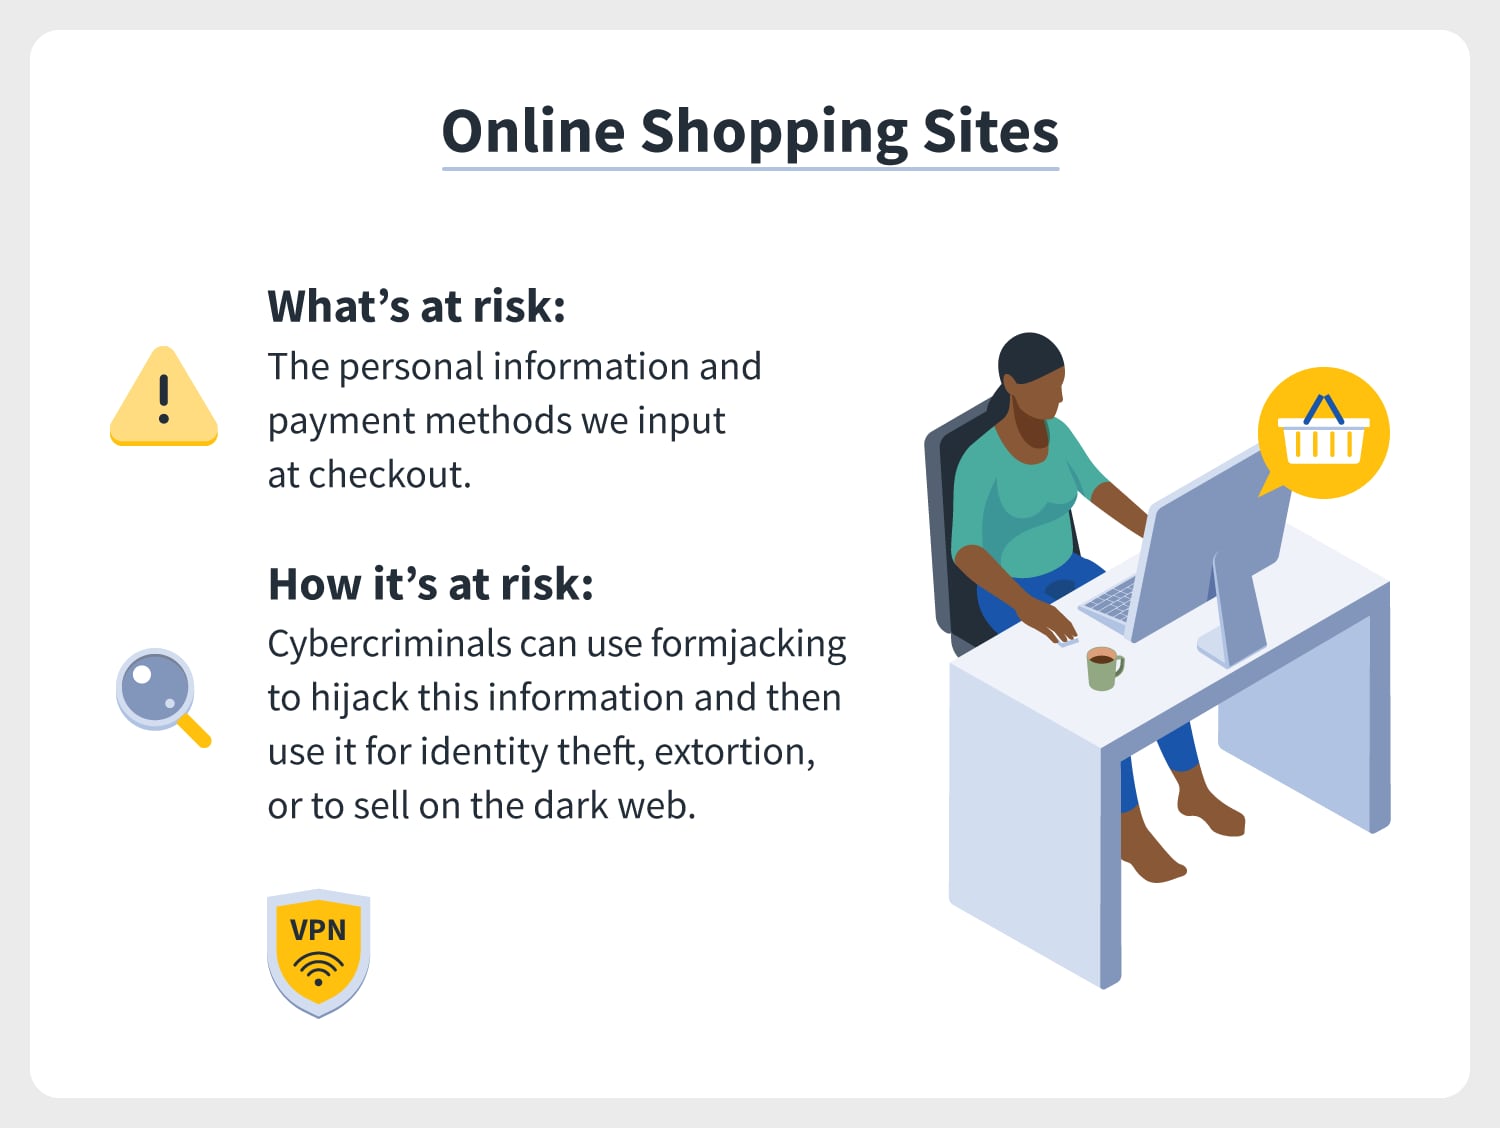 an illustration of a woman in front of a computer online shopping, indicating that she might be giving up some of her private information online even if she doesn’t mean to, which is the privacy paradox